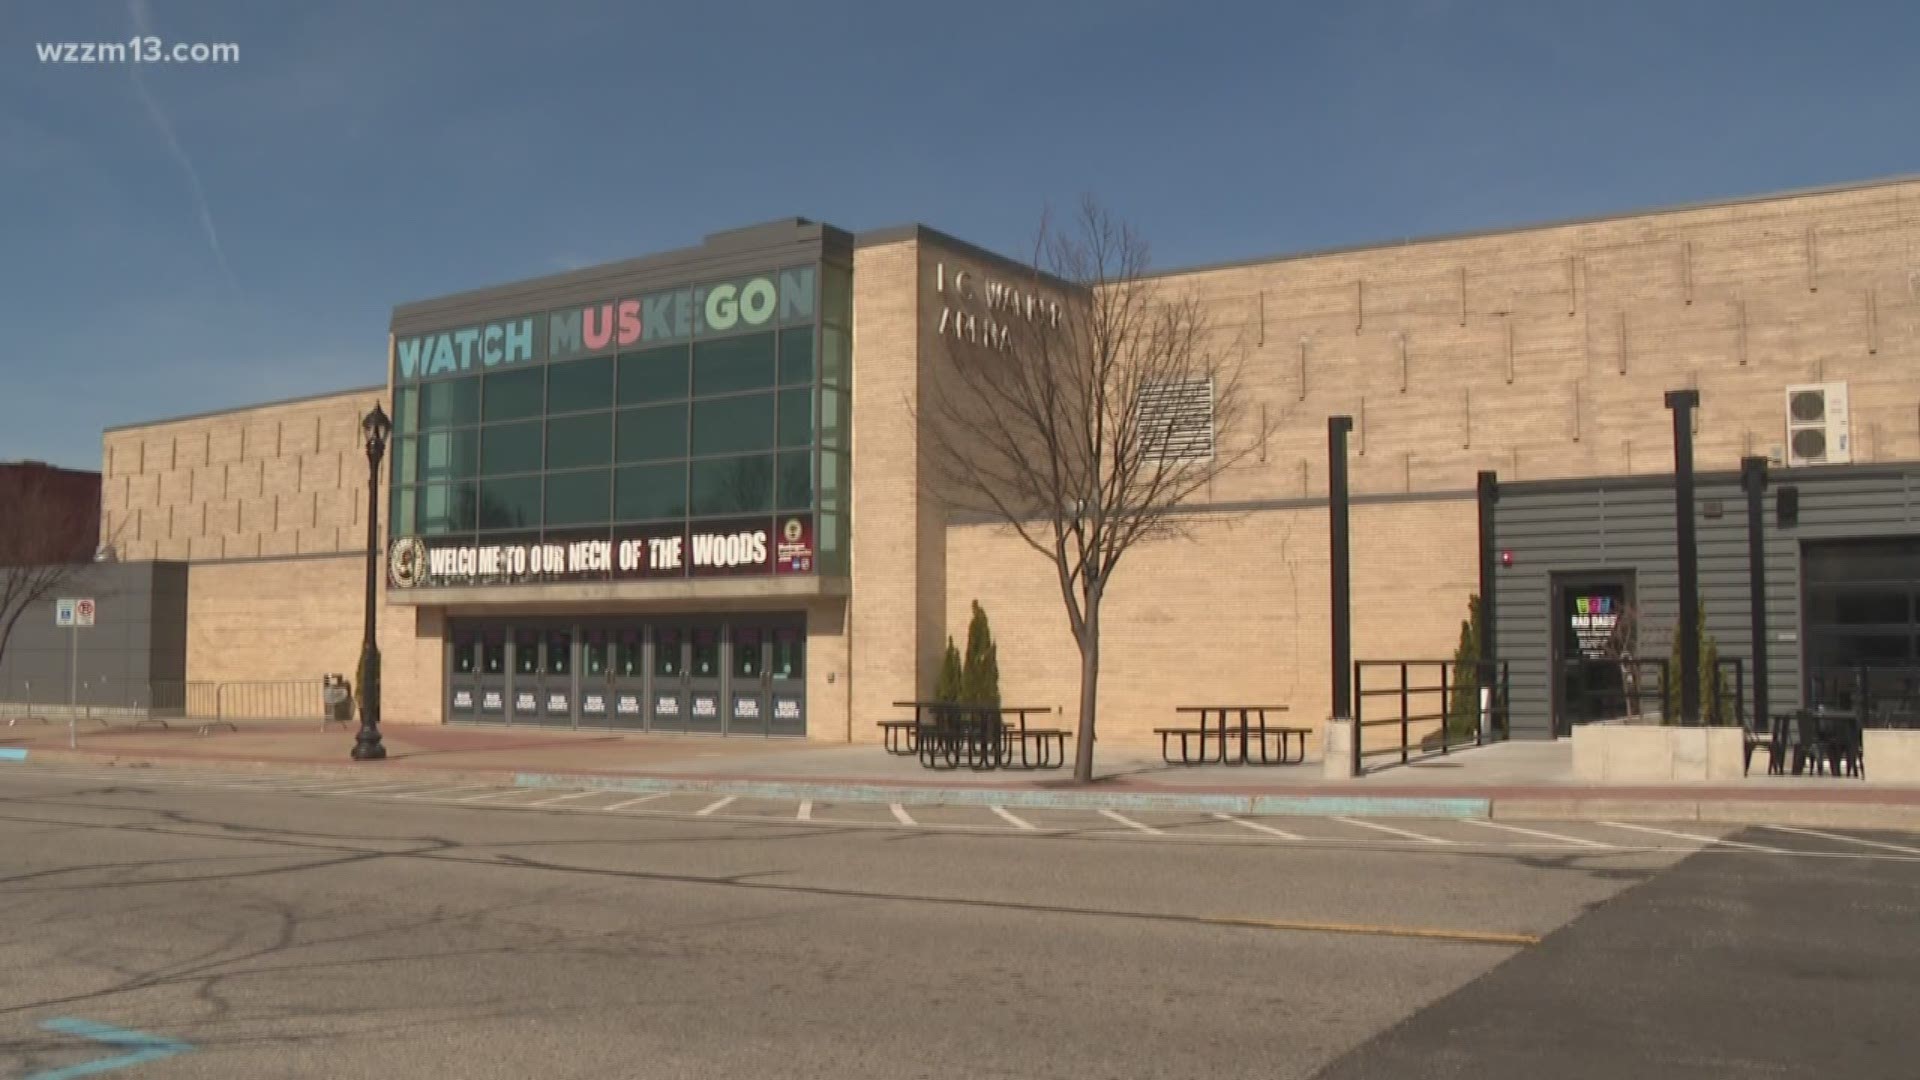 The Lumberjacks have signed a lease for their stadium in Muskegon.